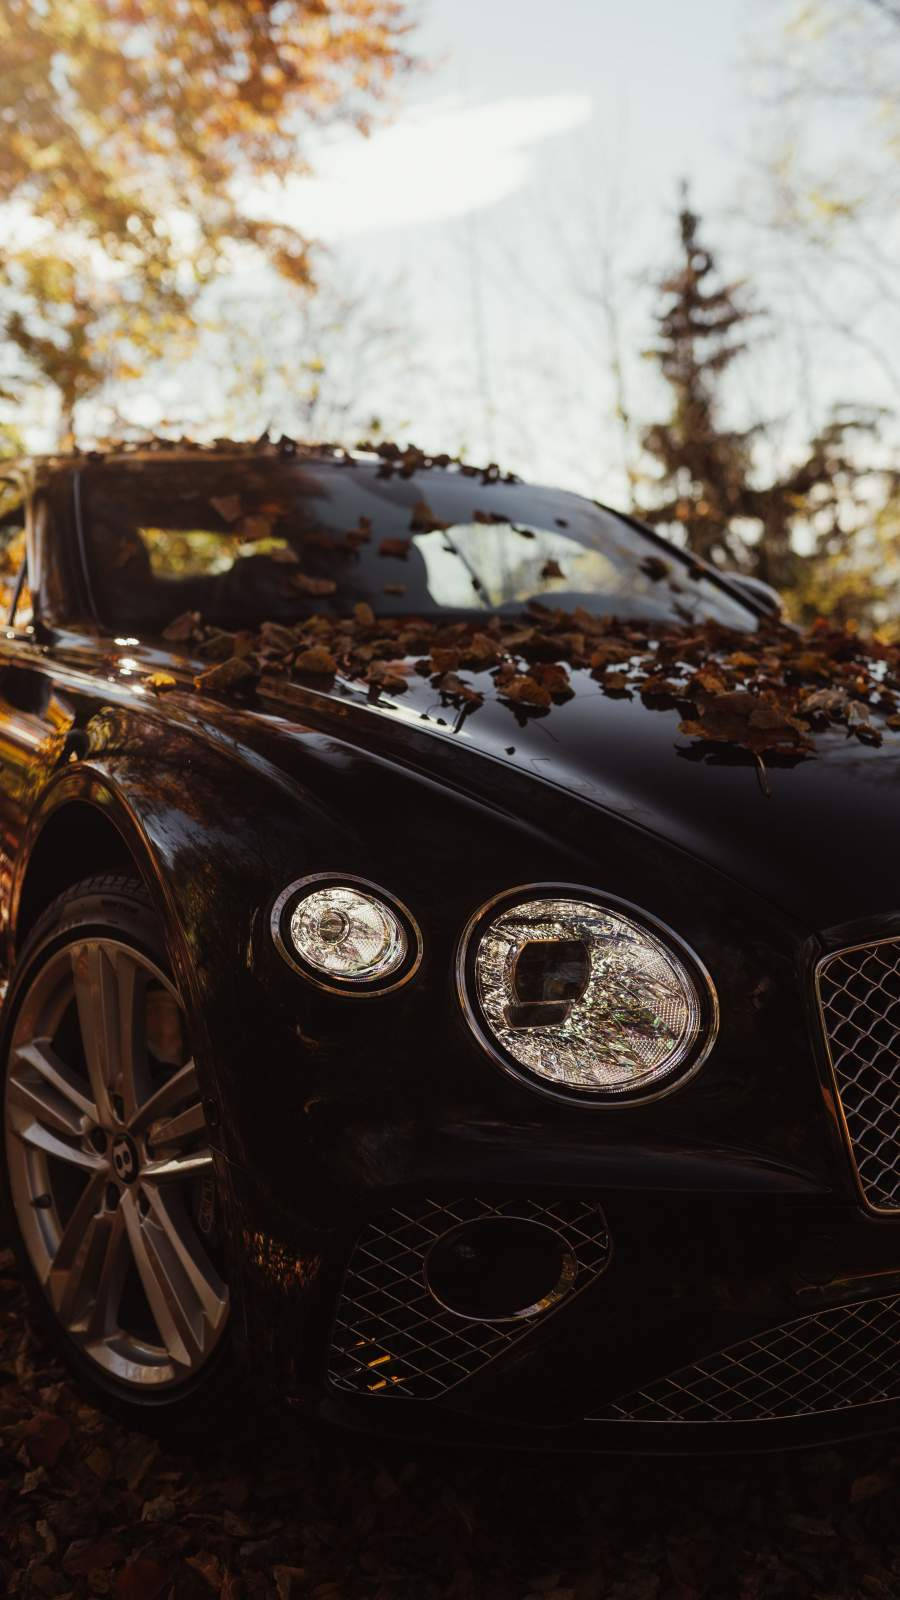 Dry Leaves Over Bentley Car Iphone Wallpaper